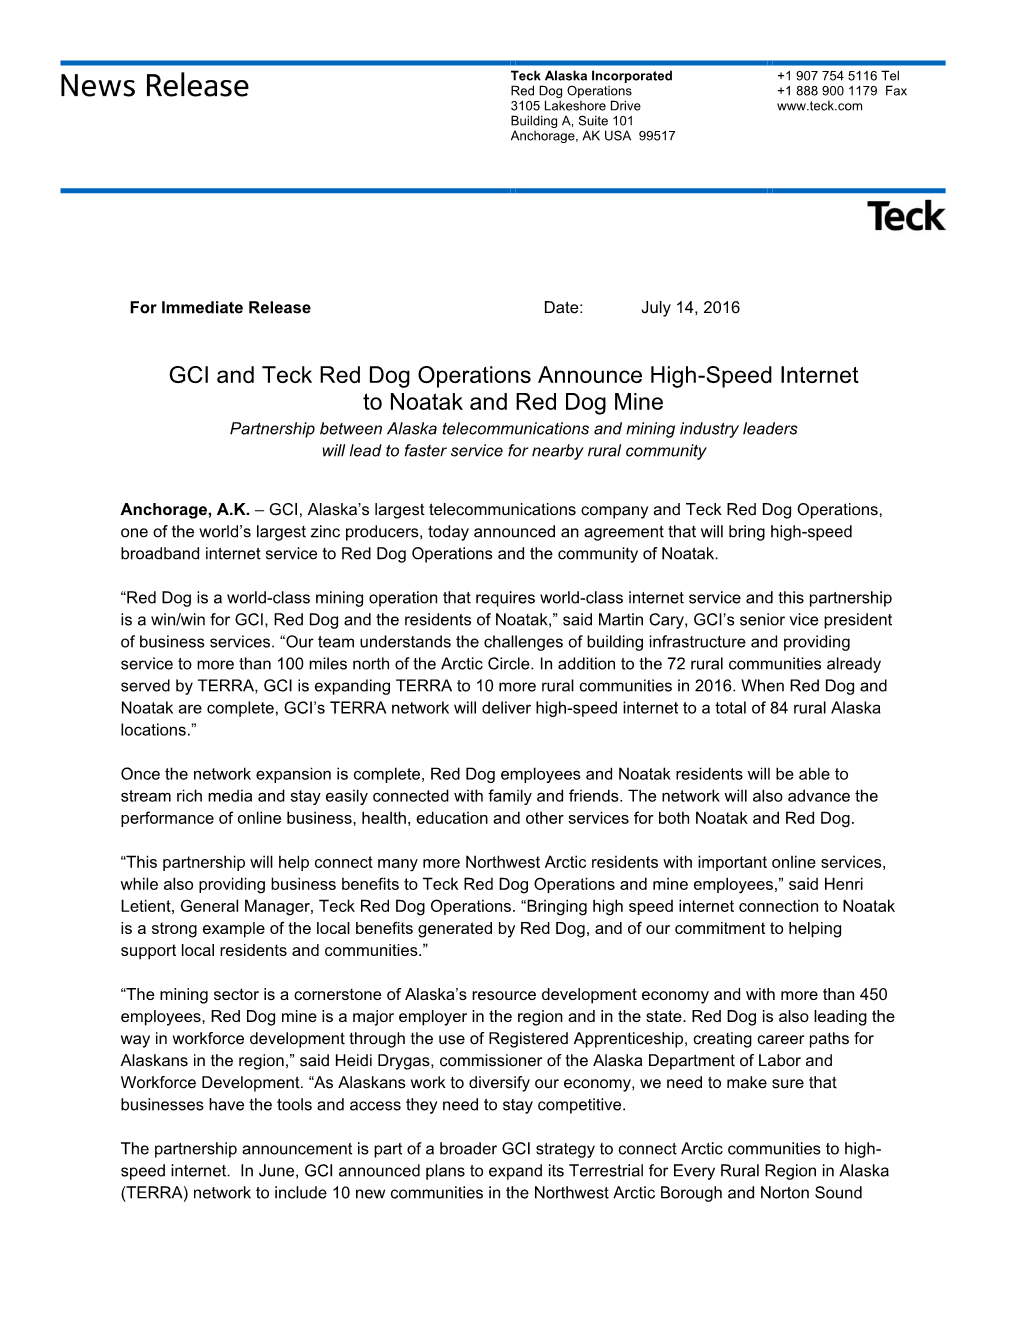 GCI and Teck Red Dog Operations Announce High-Speed Internet To